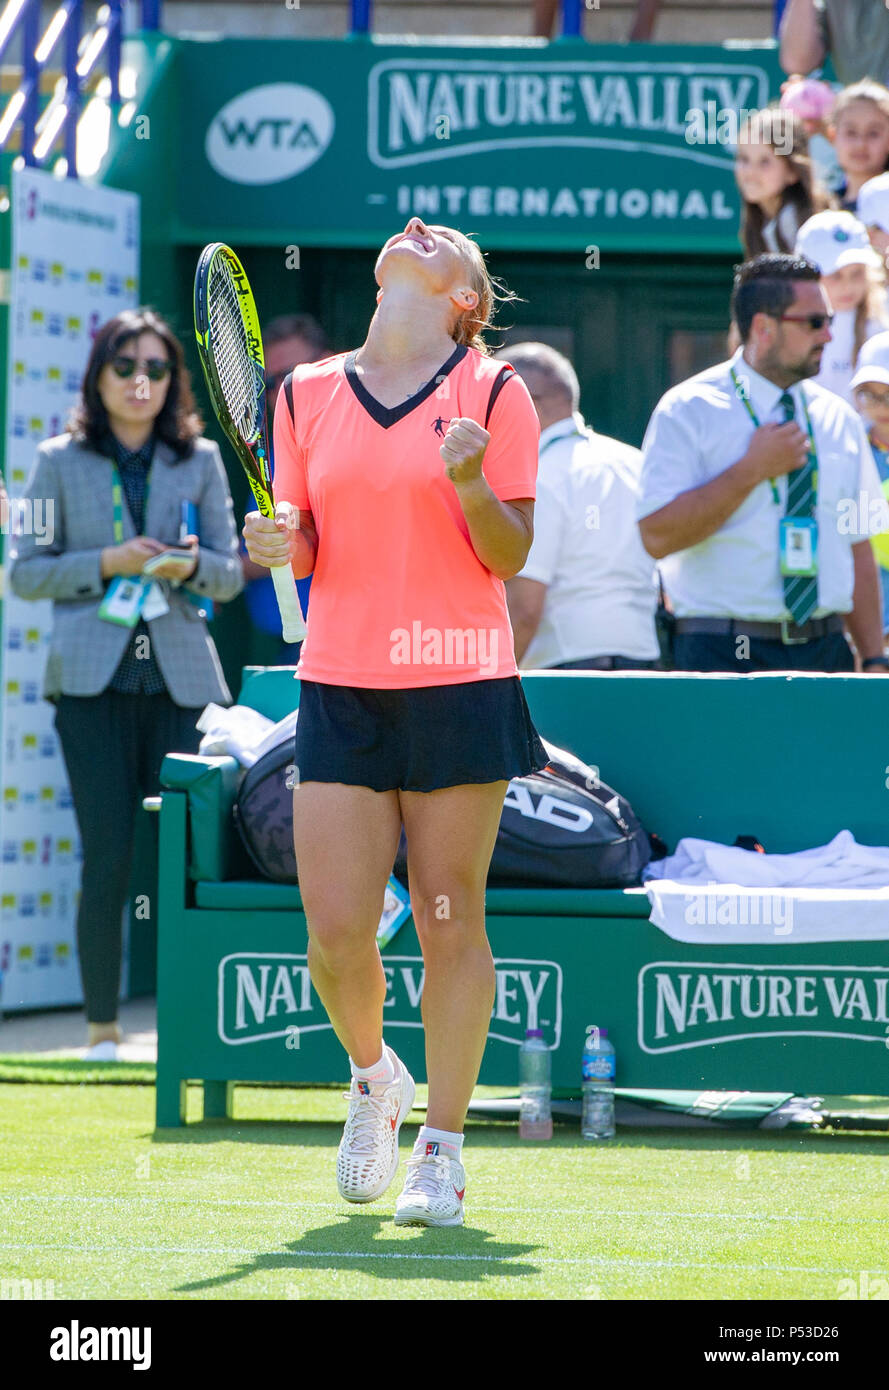 Svetlana Kuznetsova of Russia celebrates her victory over Maria Sakkari of Greece during the Nature Valley International tennis tournament at Devonshire Park in Eastbourne East Sussex UK. 24 June 2018 Stock Photo